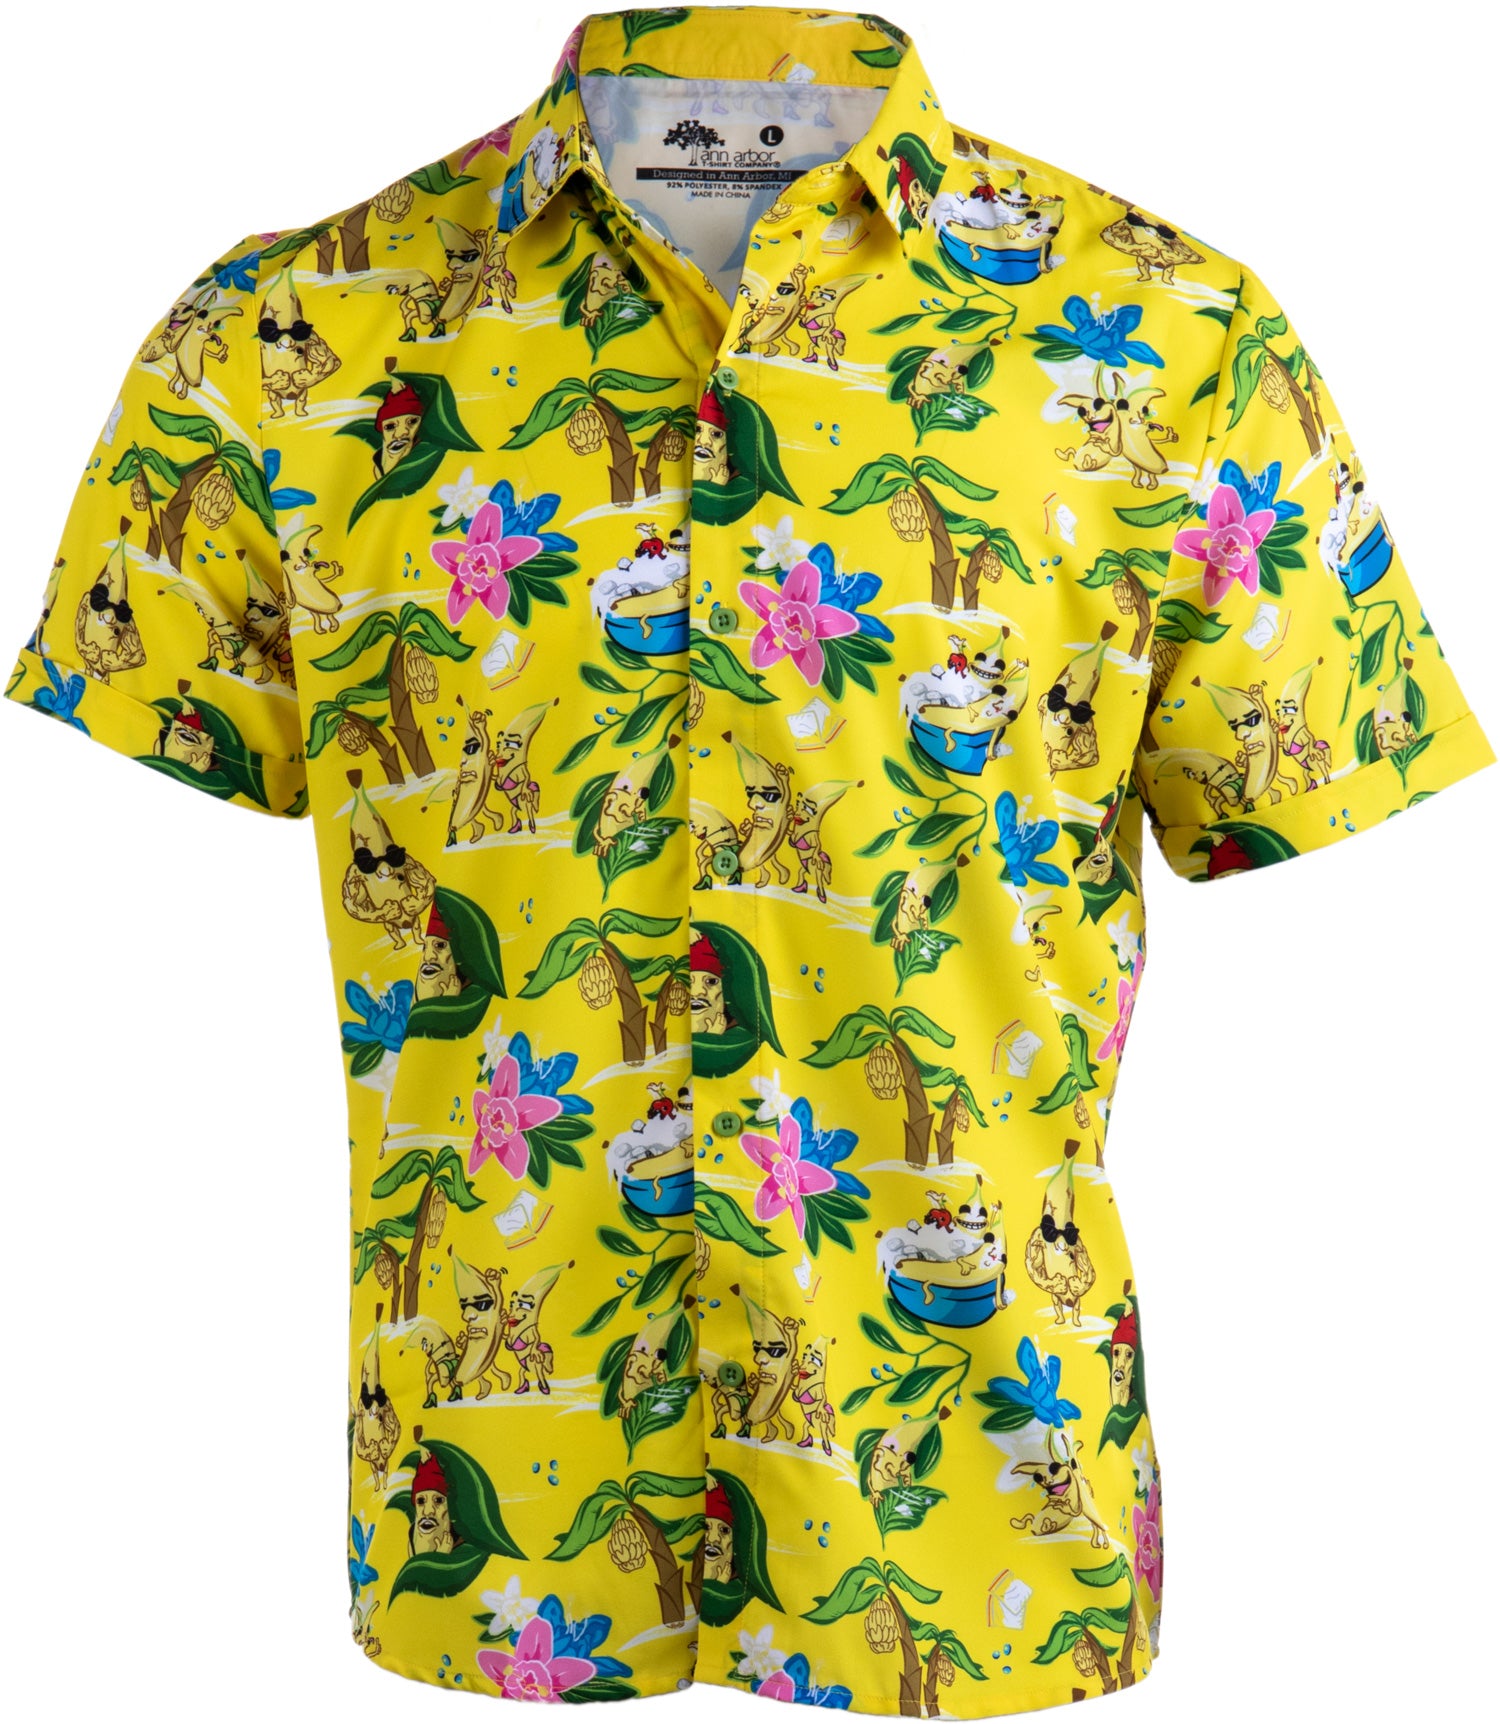 Miami Marlins Tropical Button-Up Shirt Presented by Goya Foods